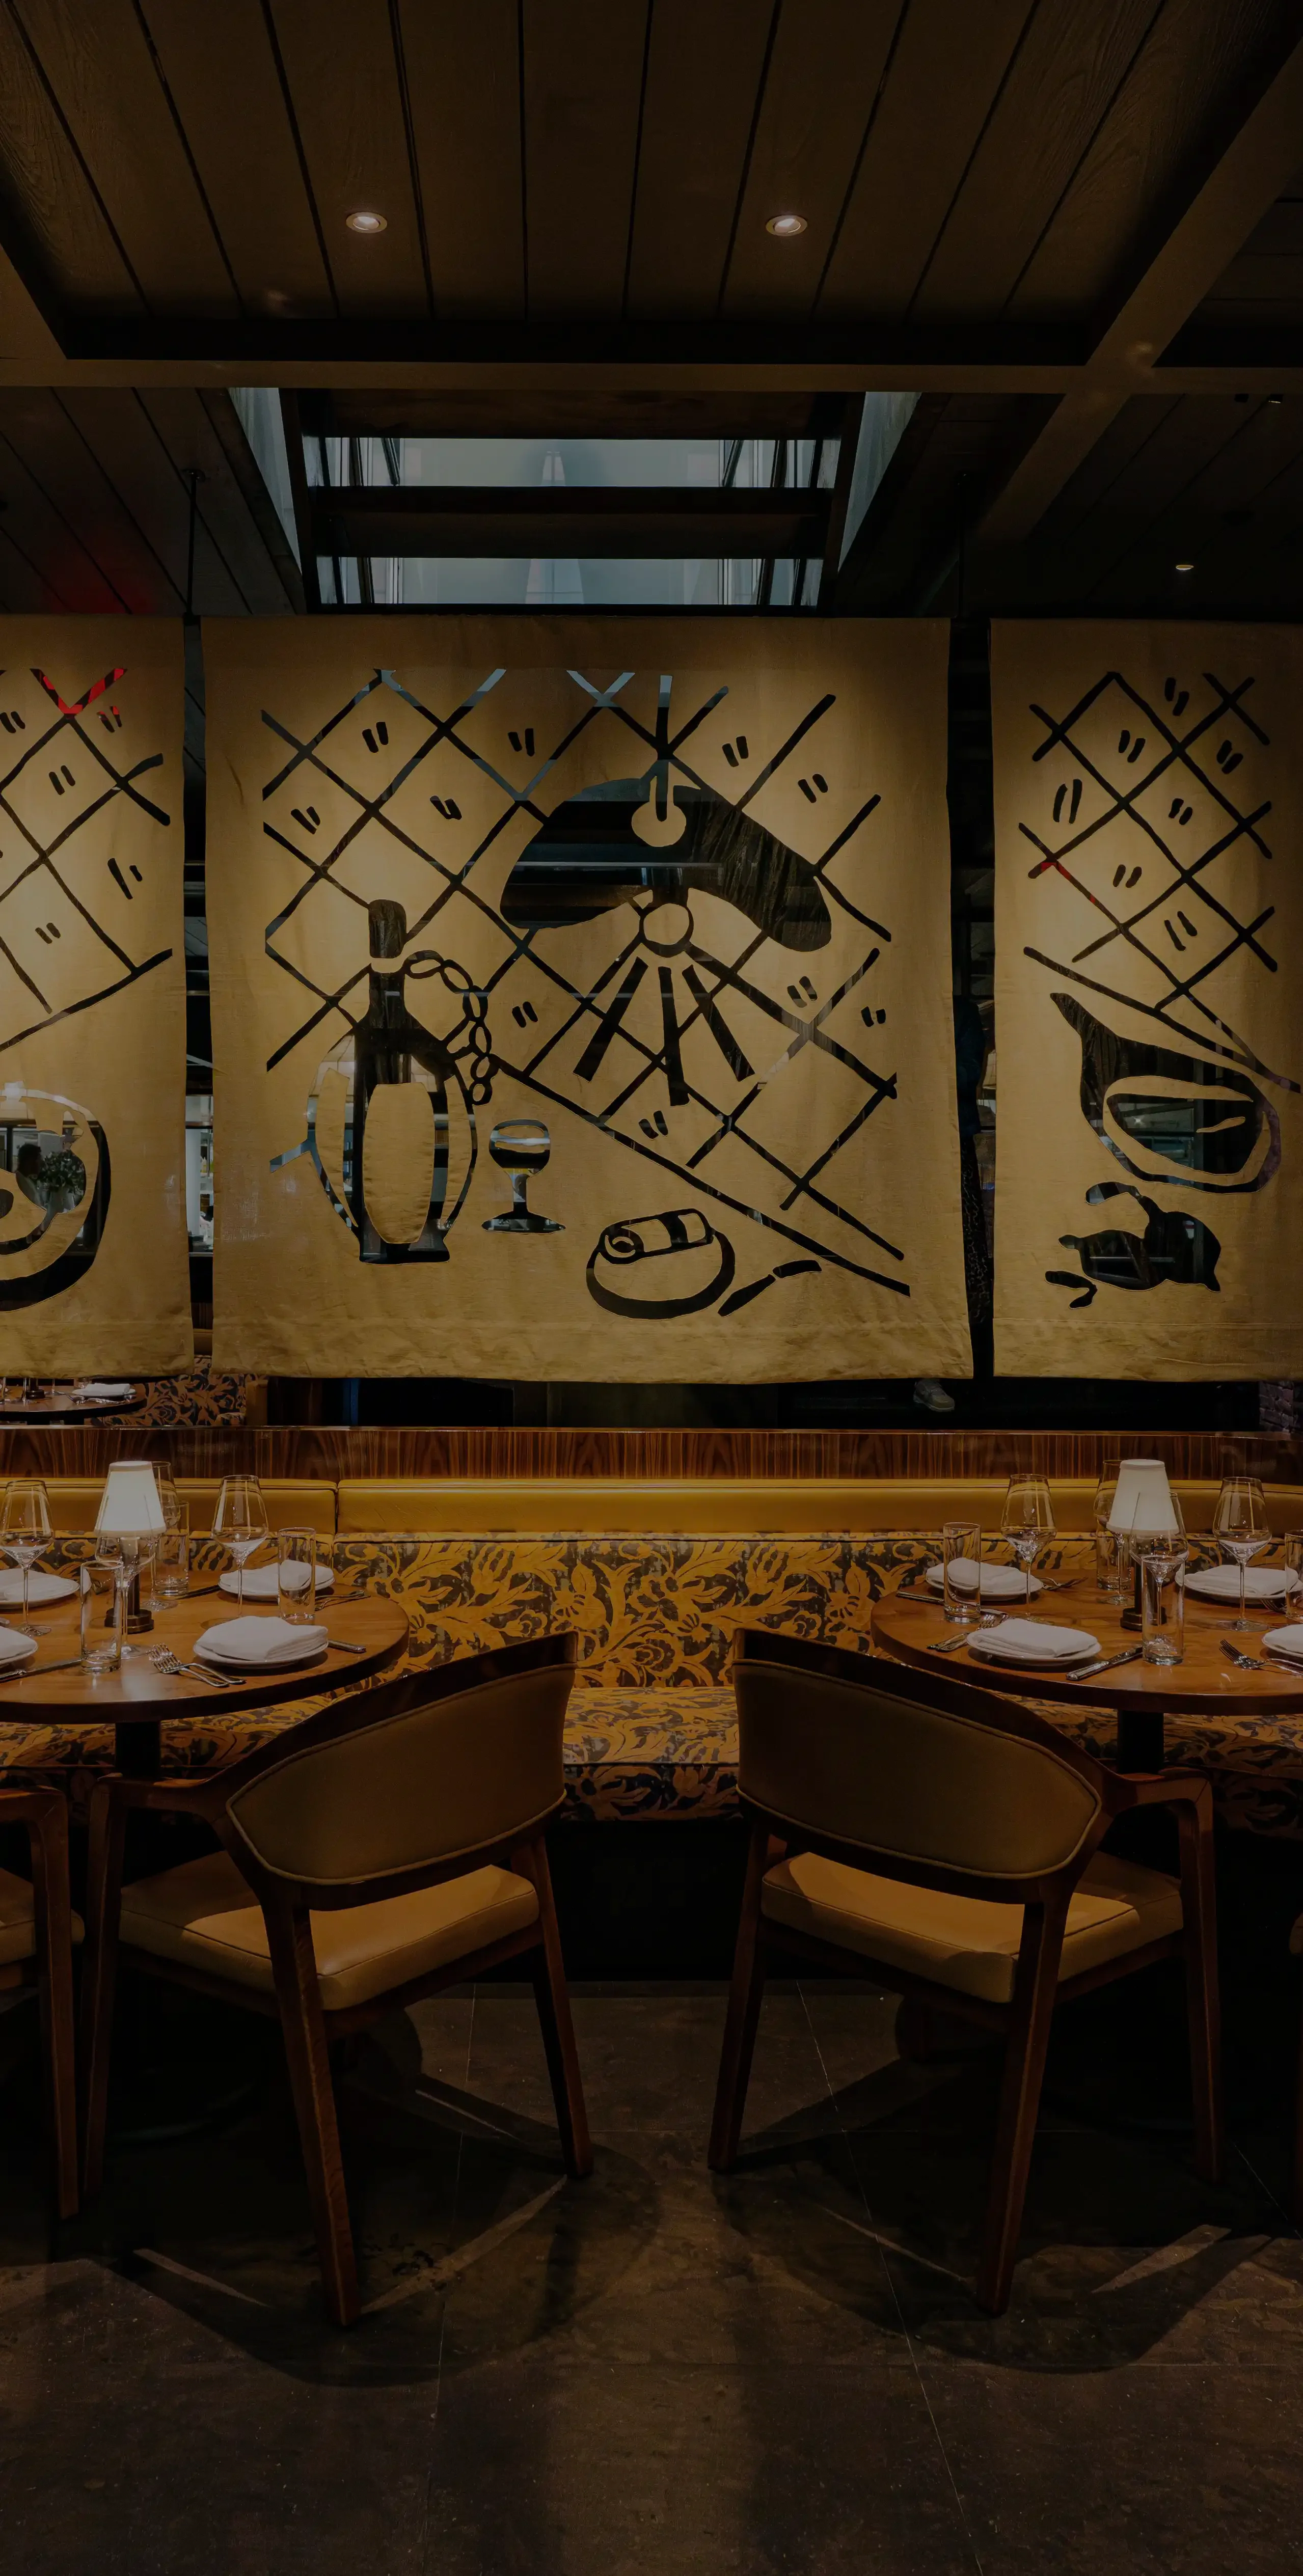 An image of the moody interior dining space at Sartiano's restaurant in New York City.